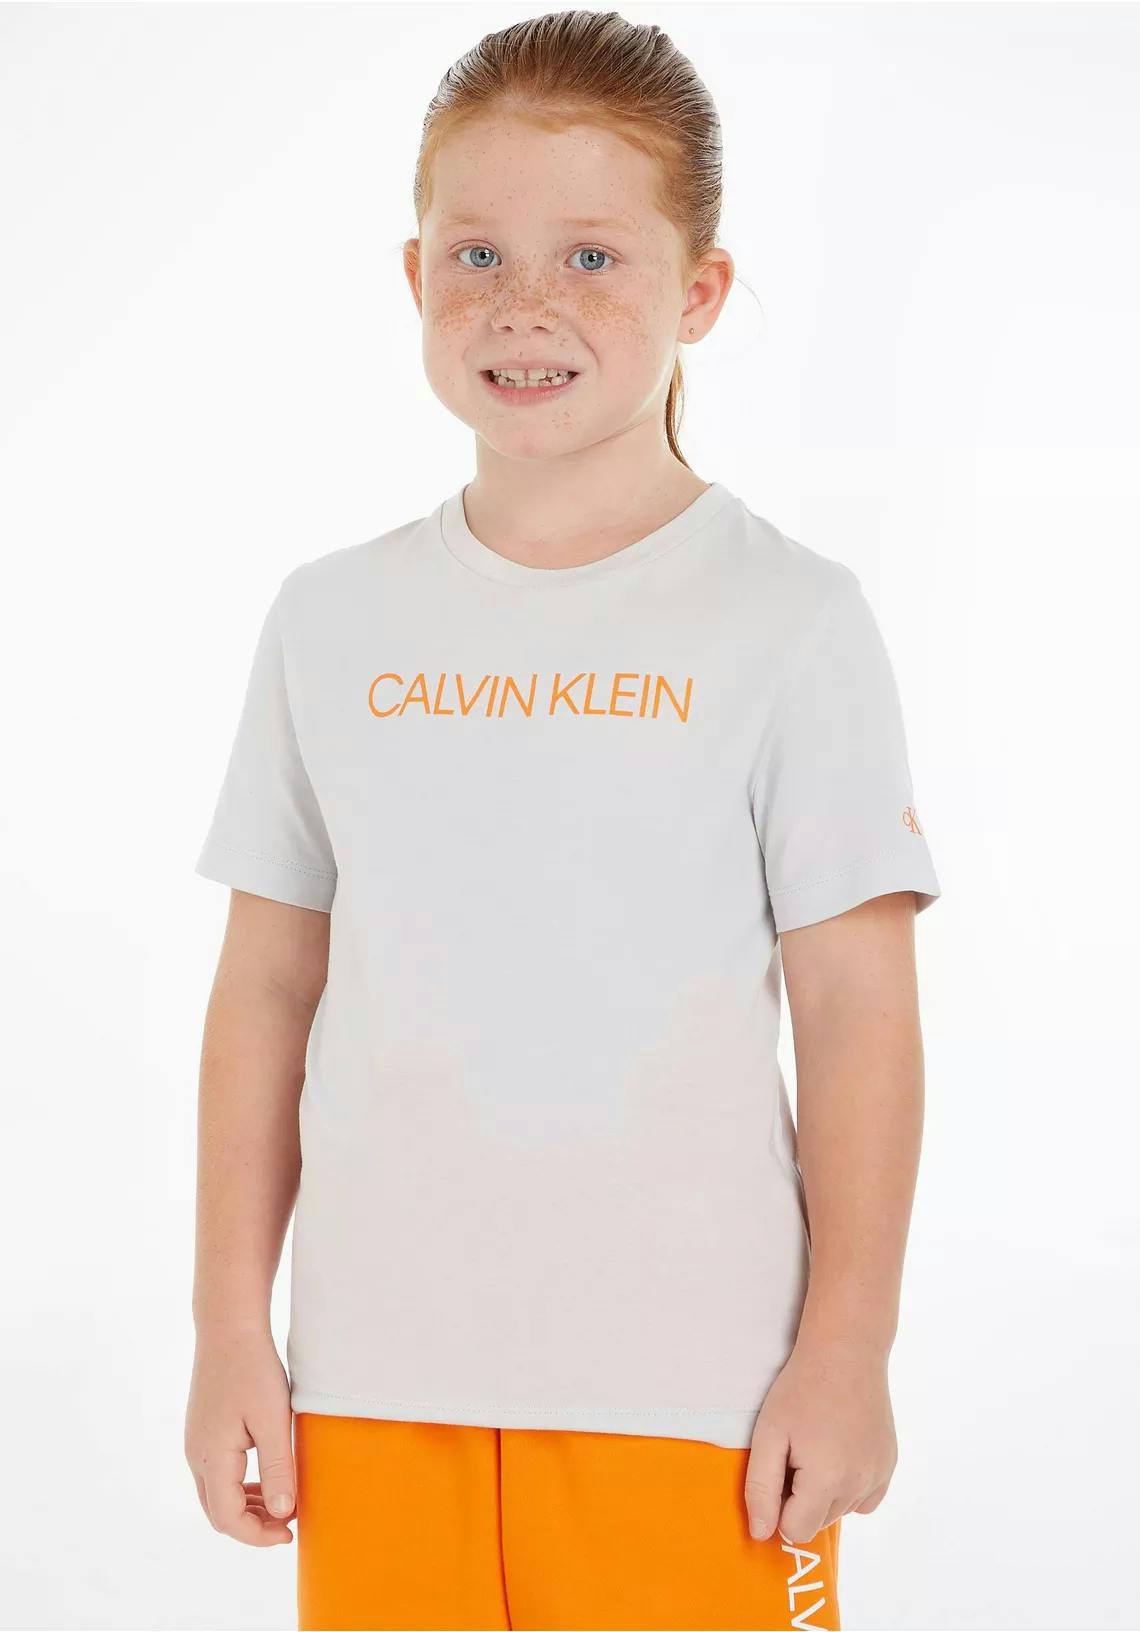 Kidz Management for Calvin Klein cover picture